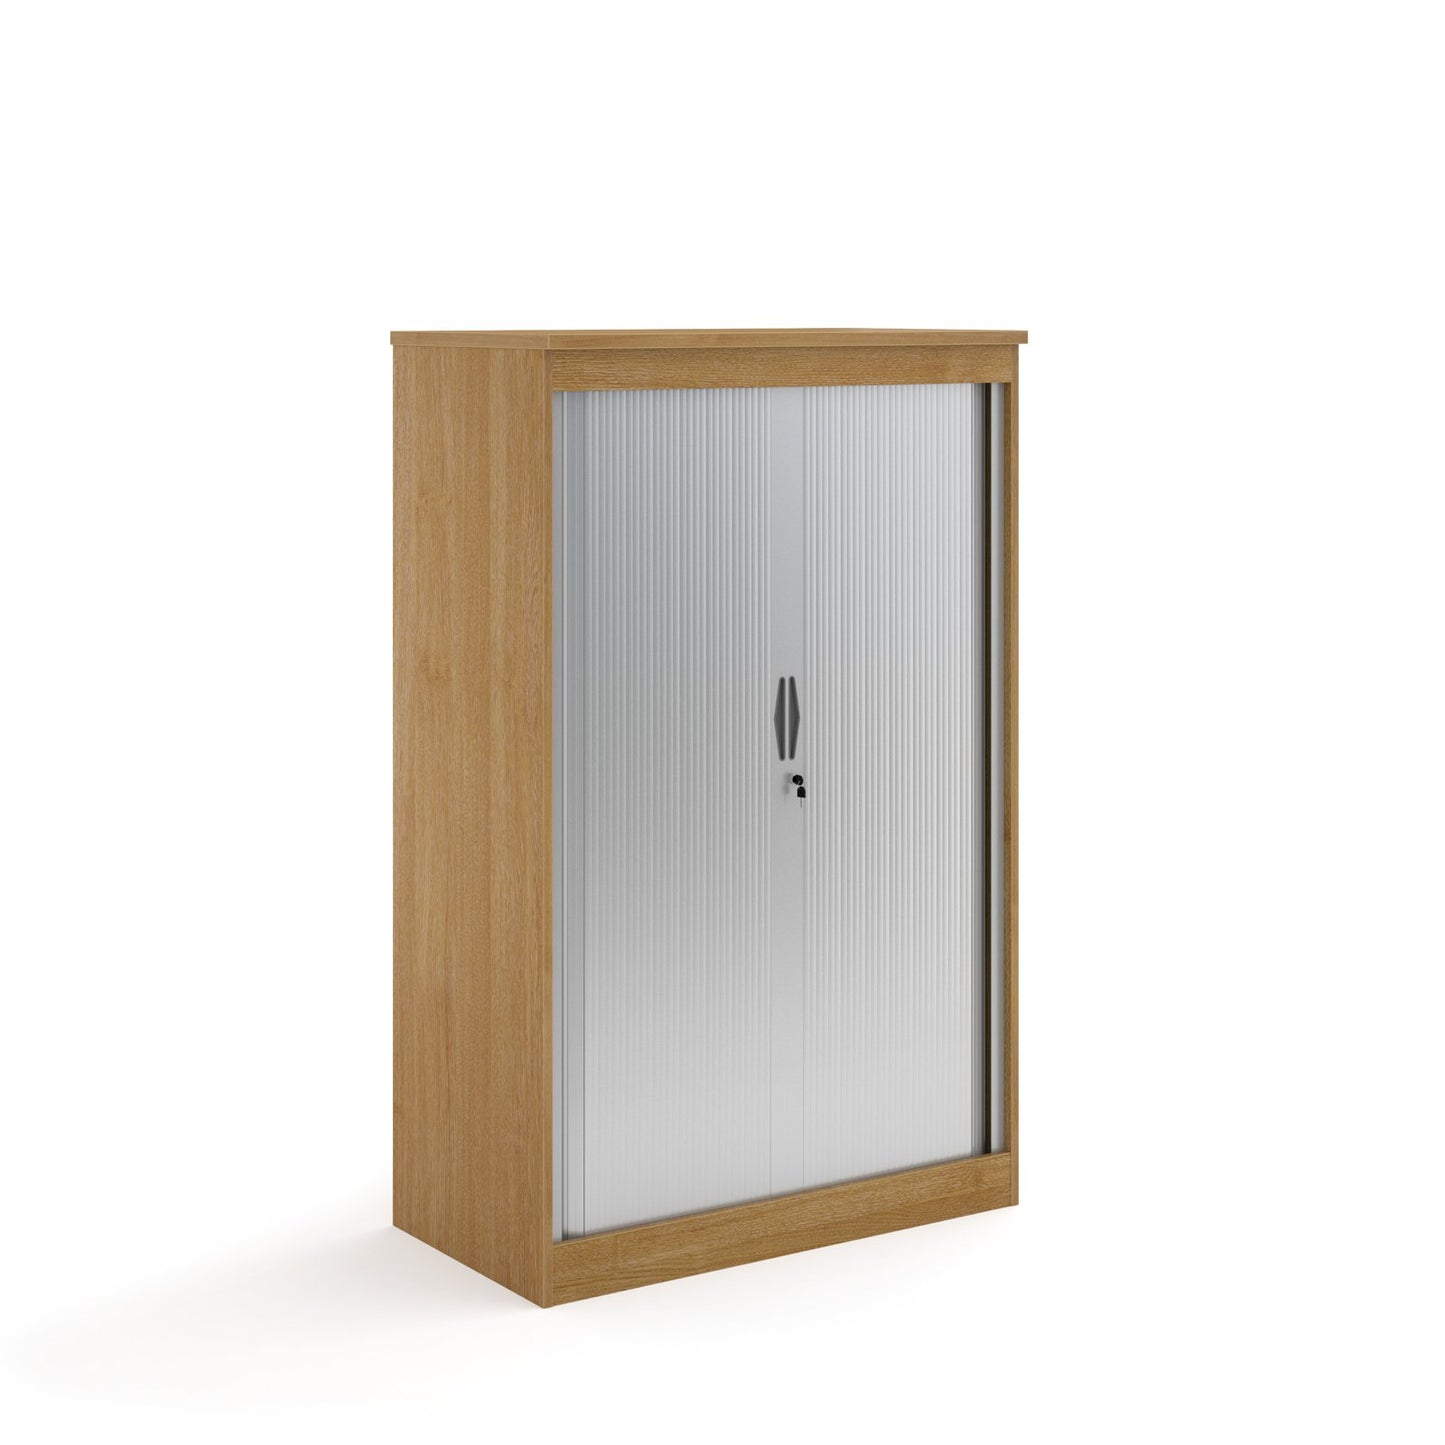 Systems Horizontal Tambour Door Cupboard 2000mm High - White